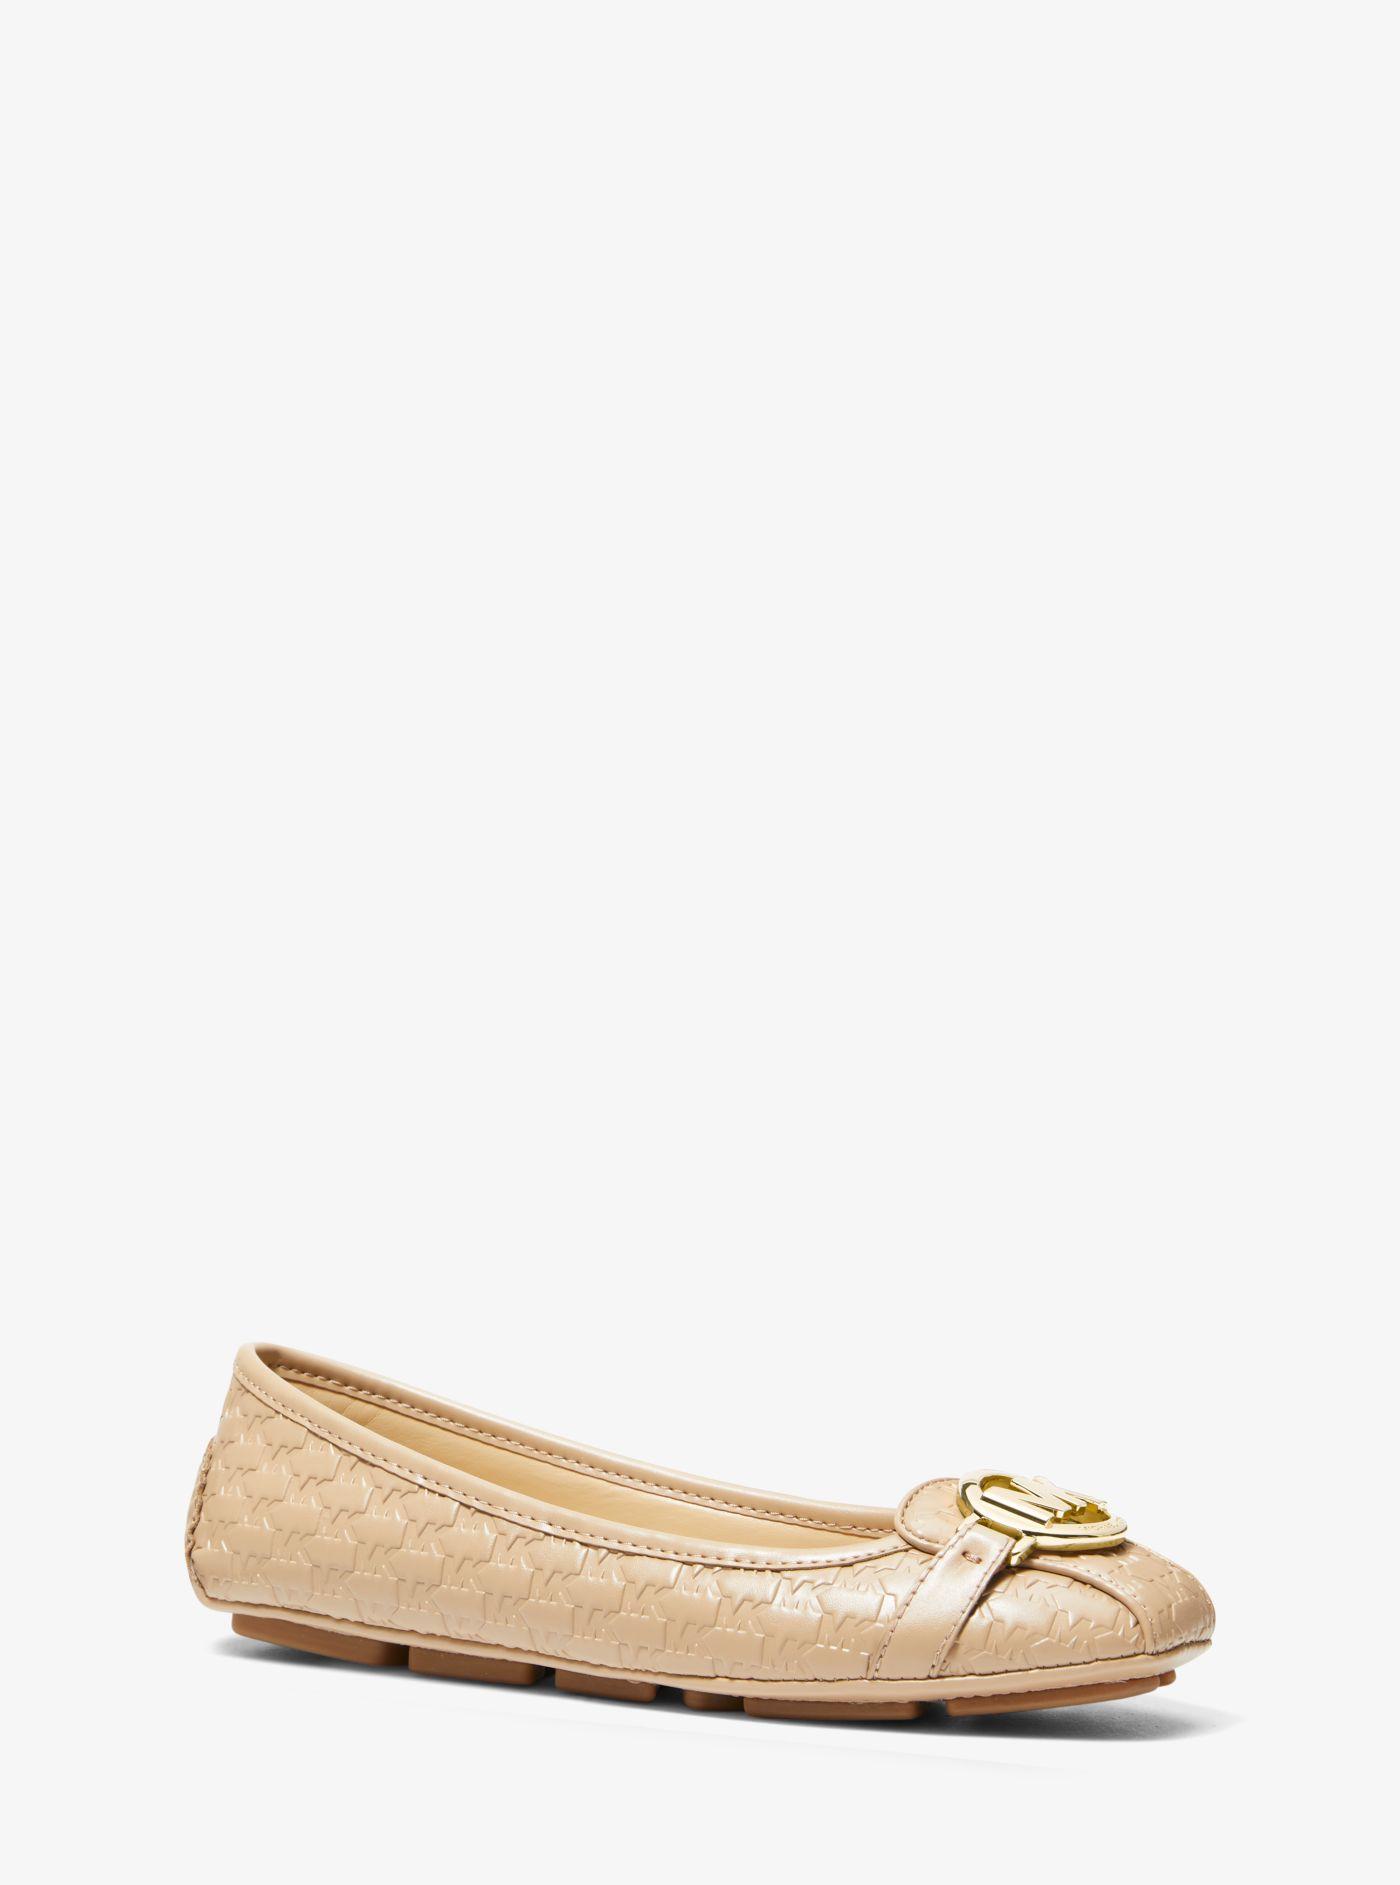 Michael Kors Fulton Logo Embossed Faux Leather Moccasin in Natural | Lyst